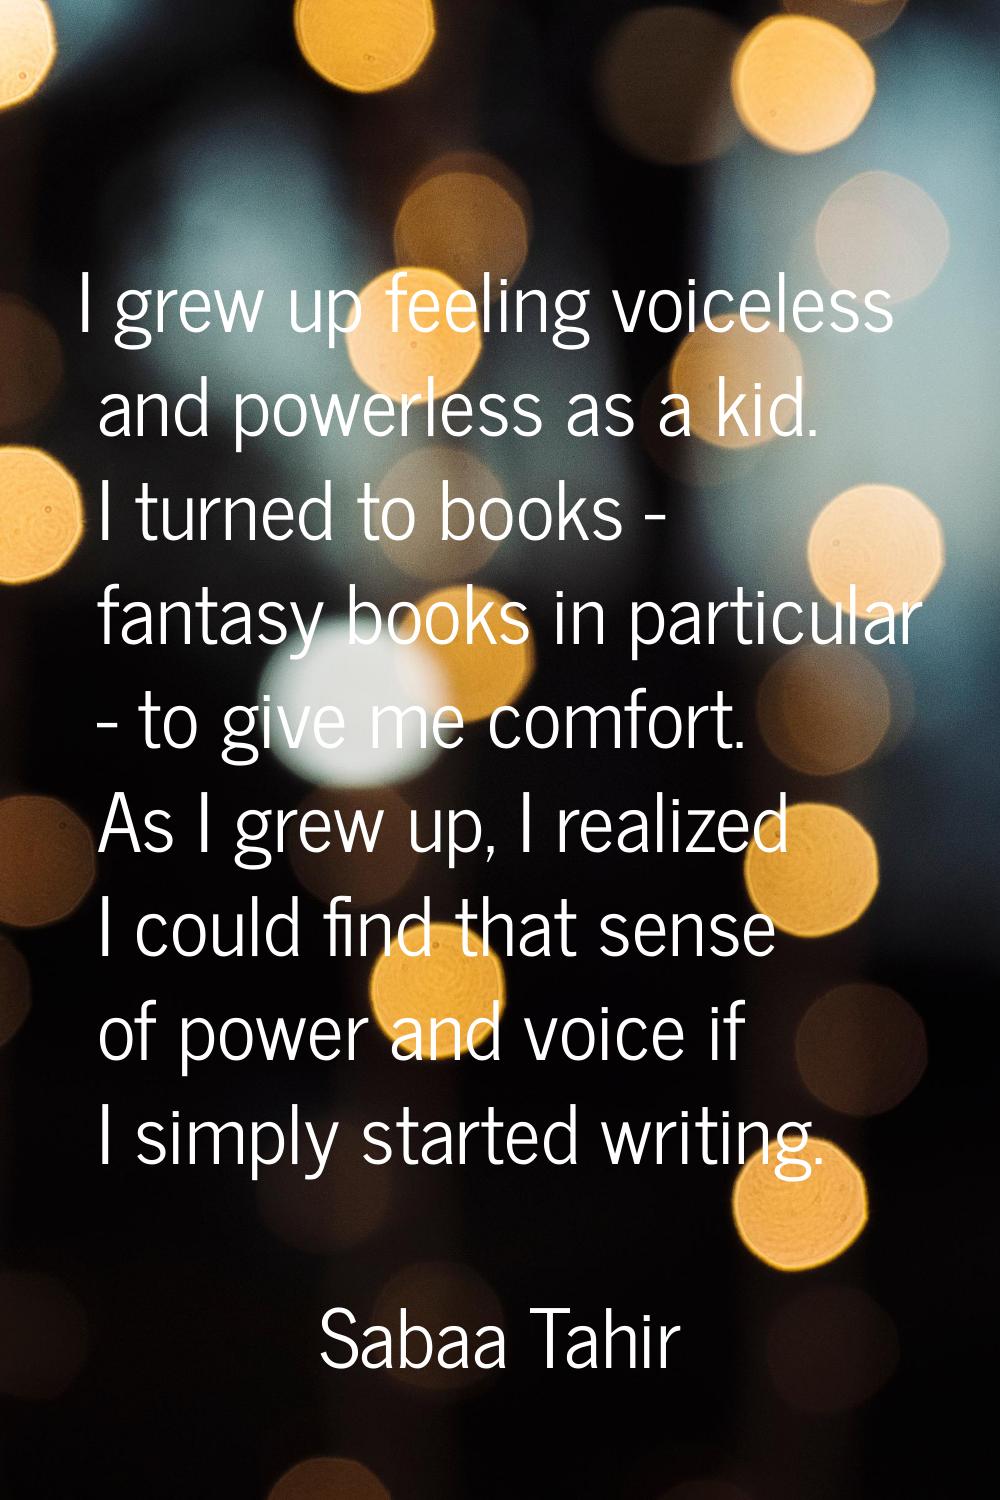 I grew up feeling voiceless and powerless as a kid. I turned to books - fantasy books in particular